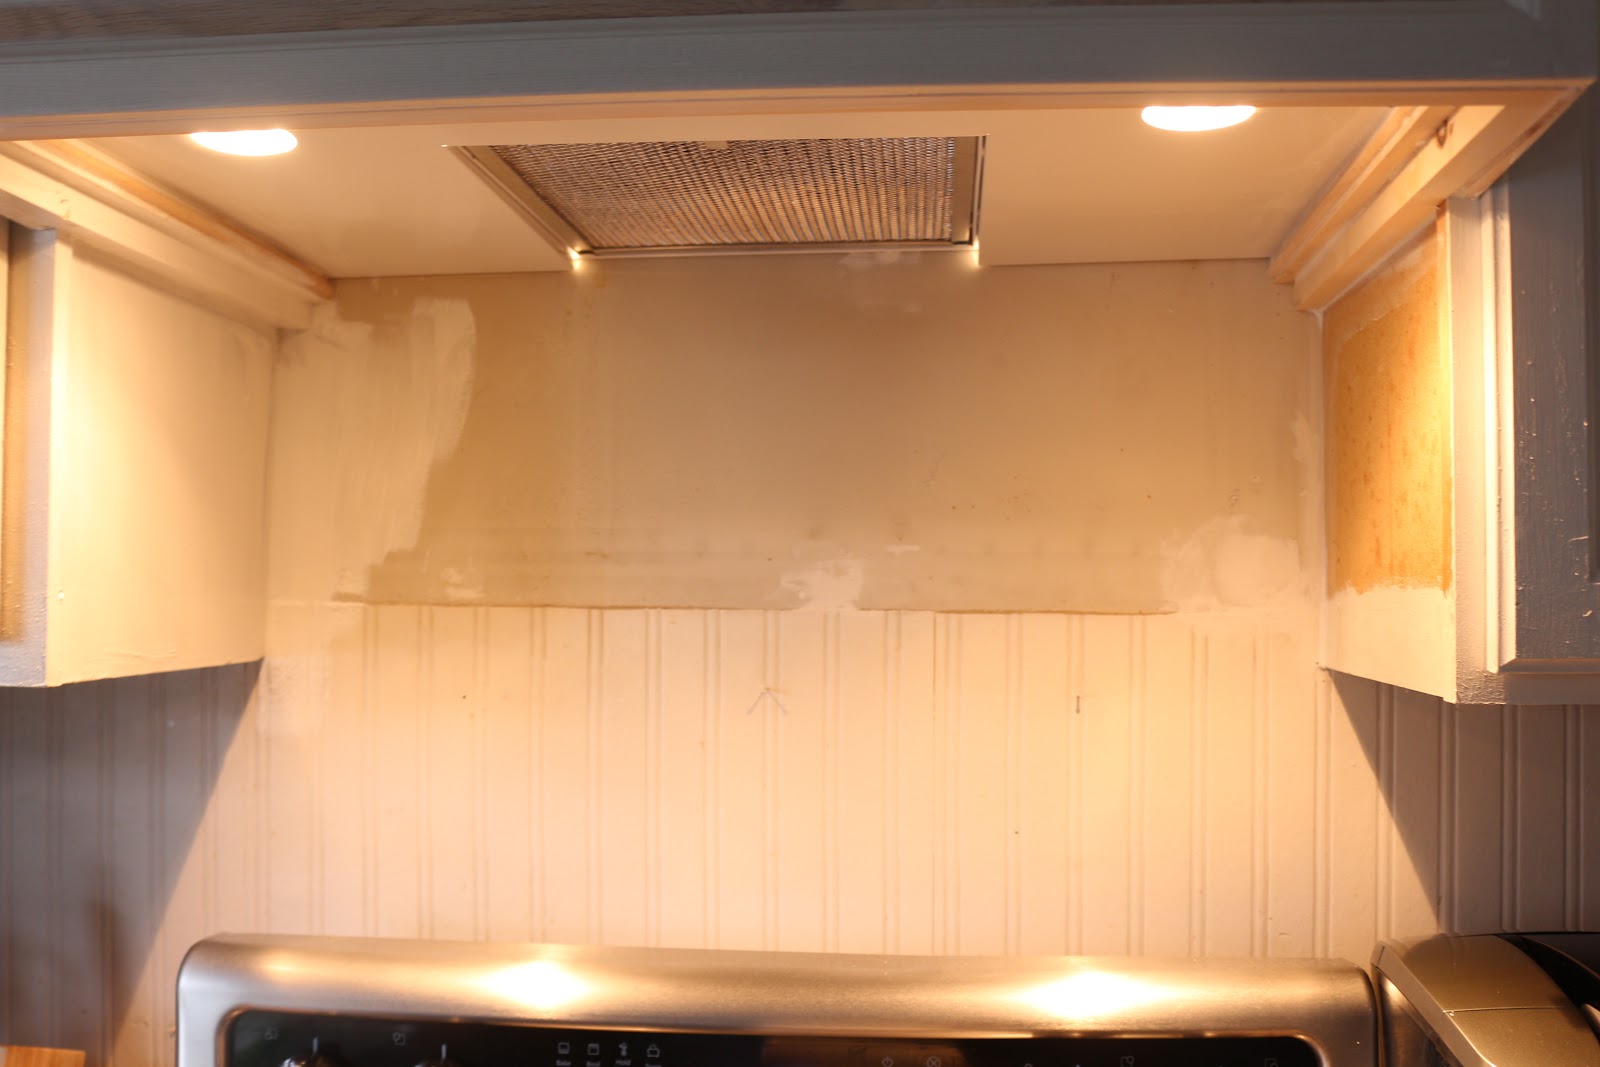 My DIY Kitchen How I Built a Rangehood Over an Existing Cabinet ...